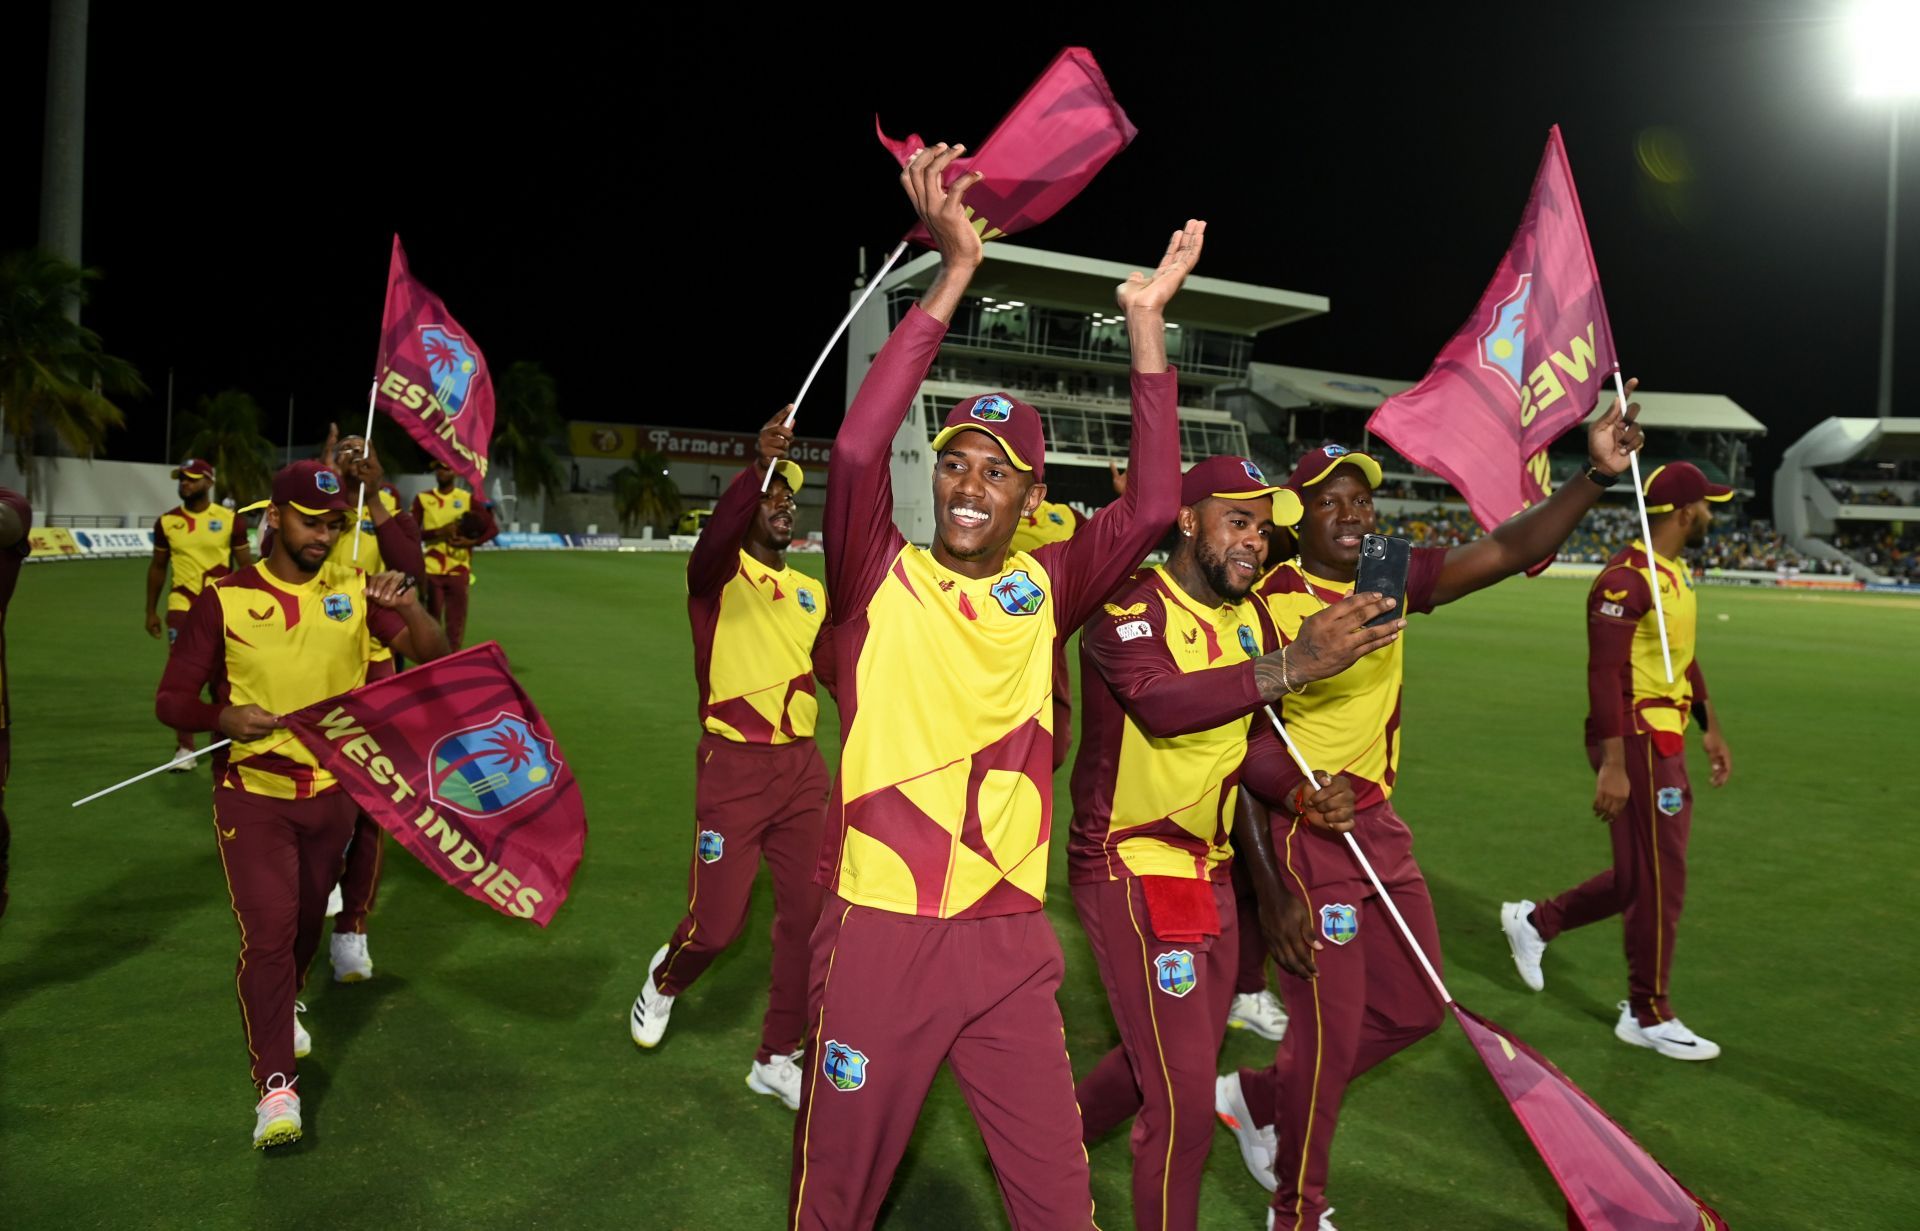 West Indies v England - T20 International Series Fifth T20I